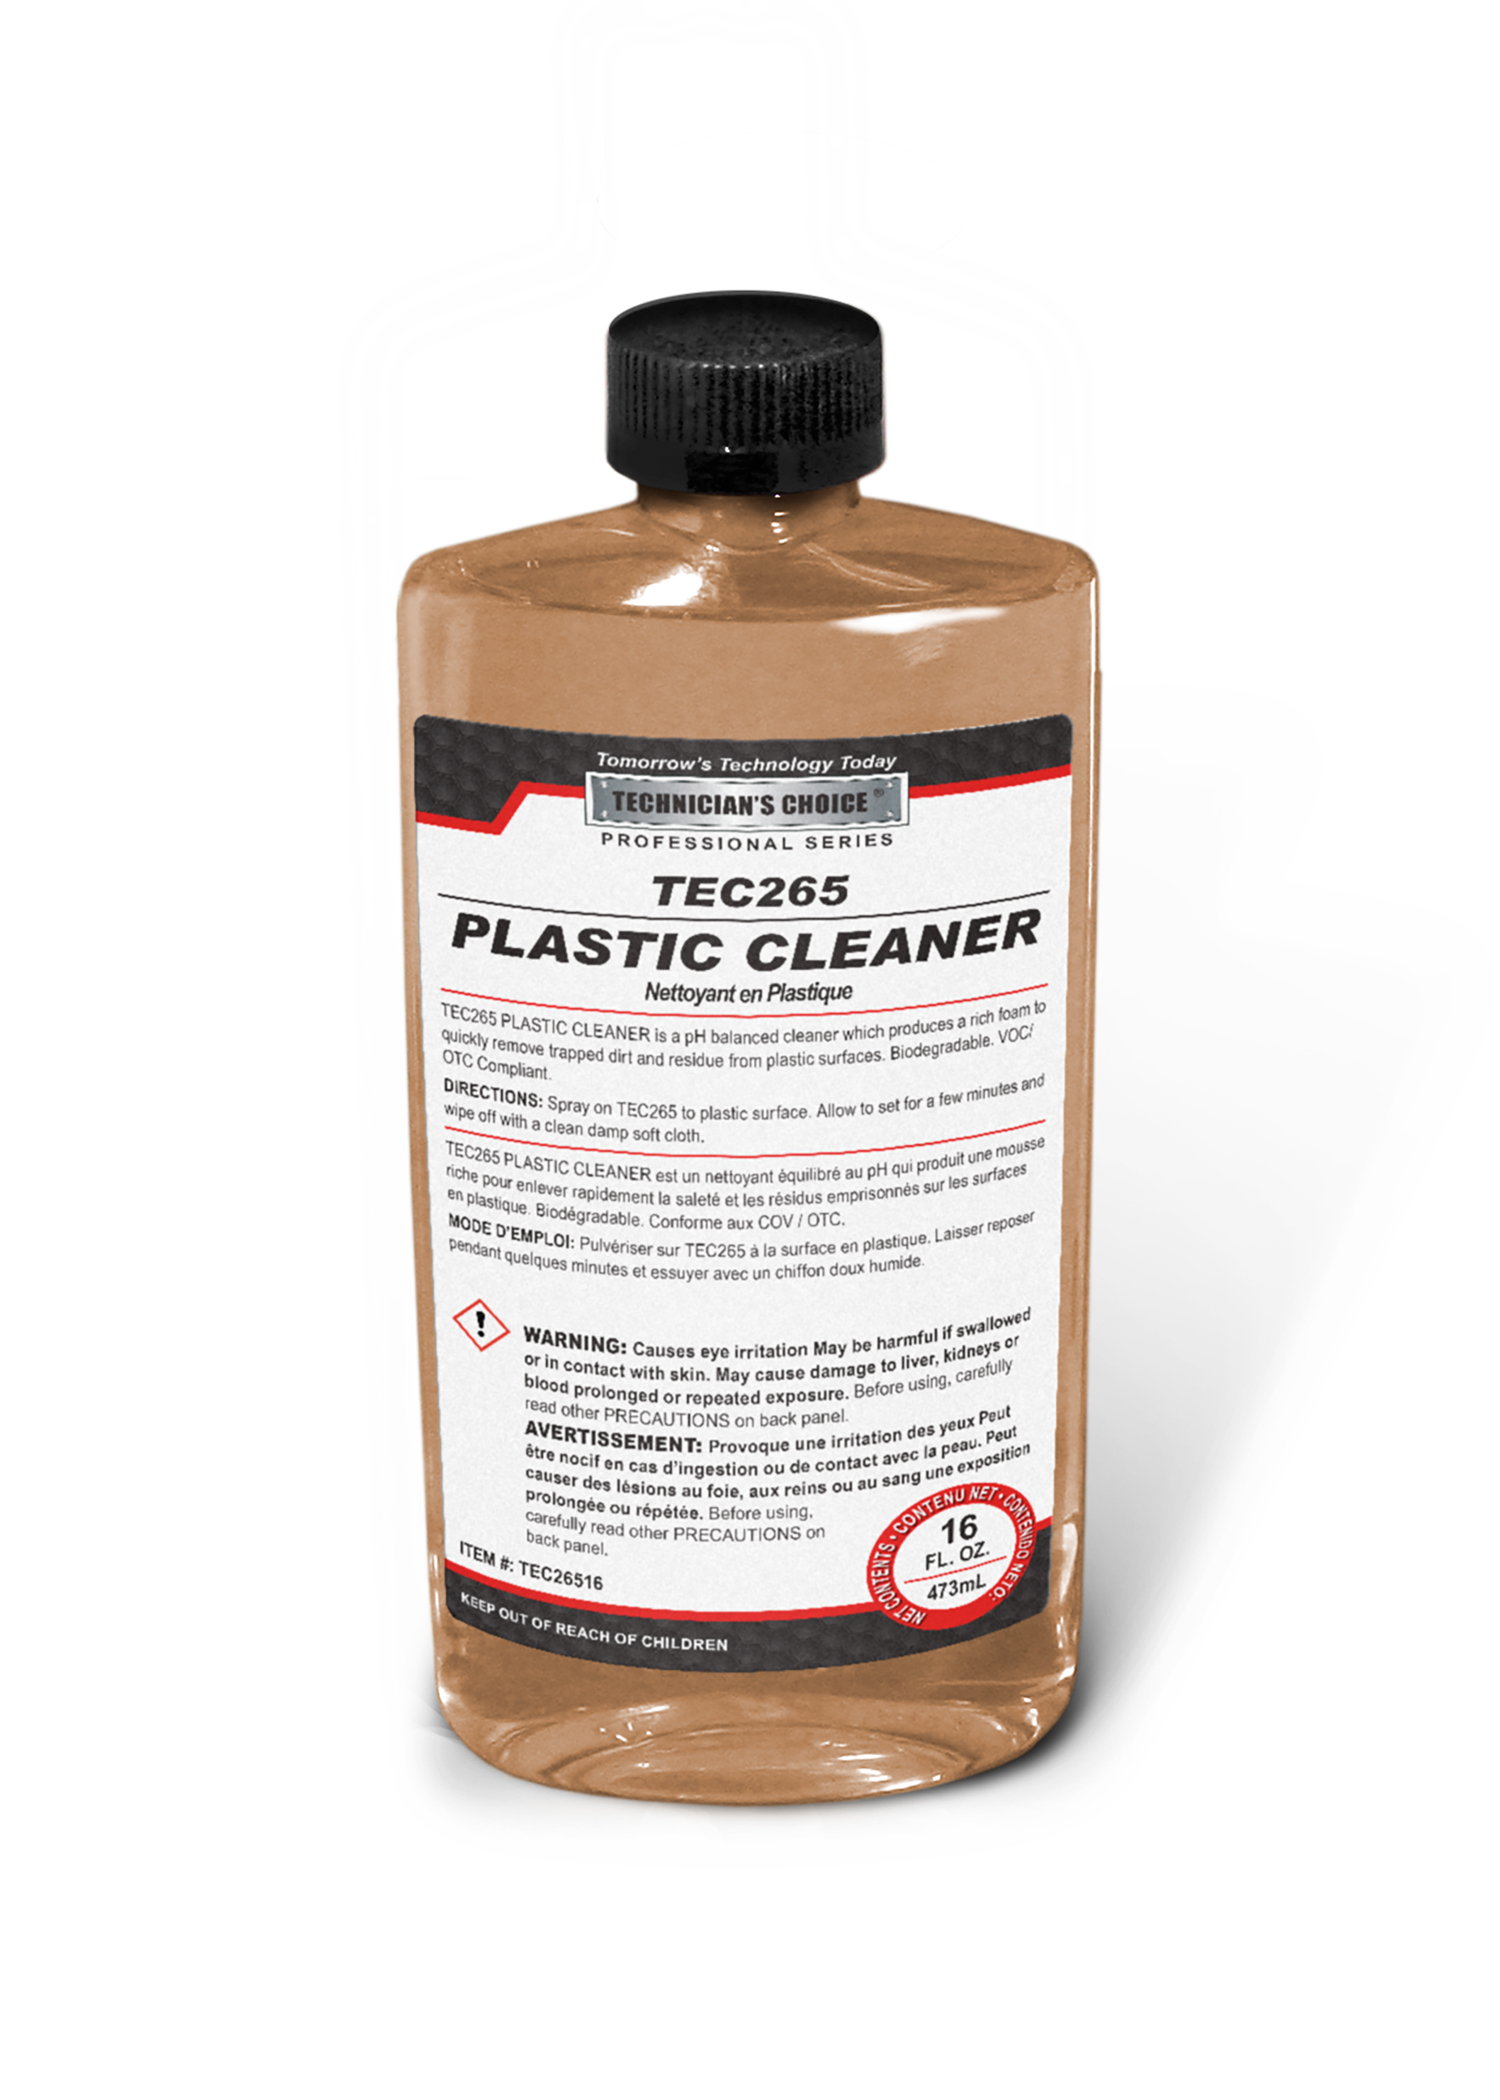 TECHNICIANS CHOICE CERAMIC DETAIL SPRAY Now available in 16oz